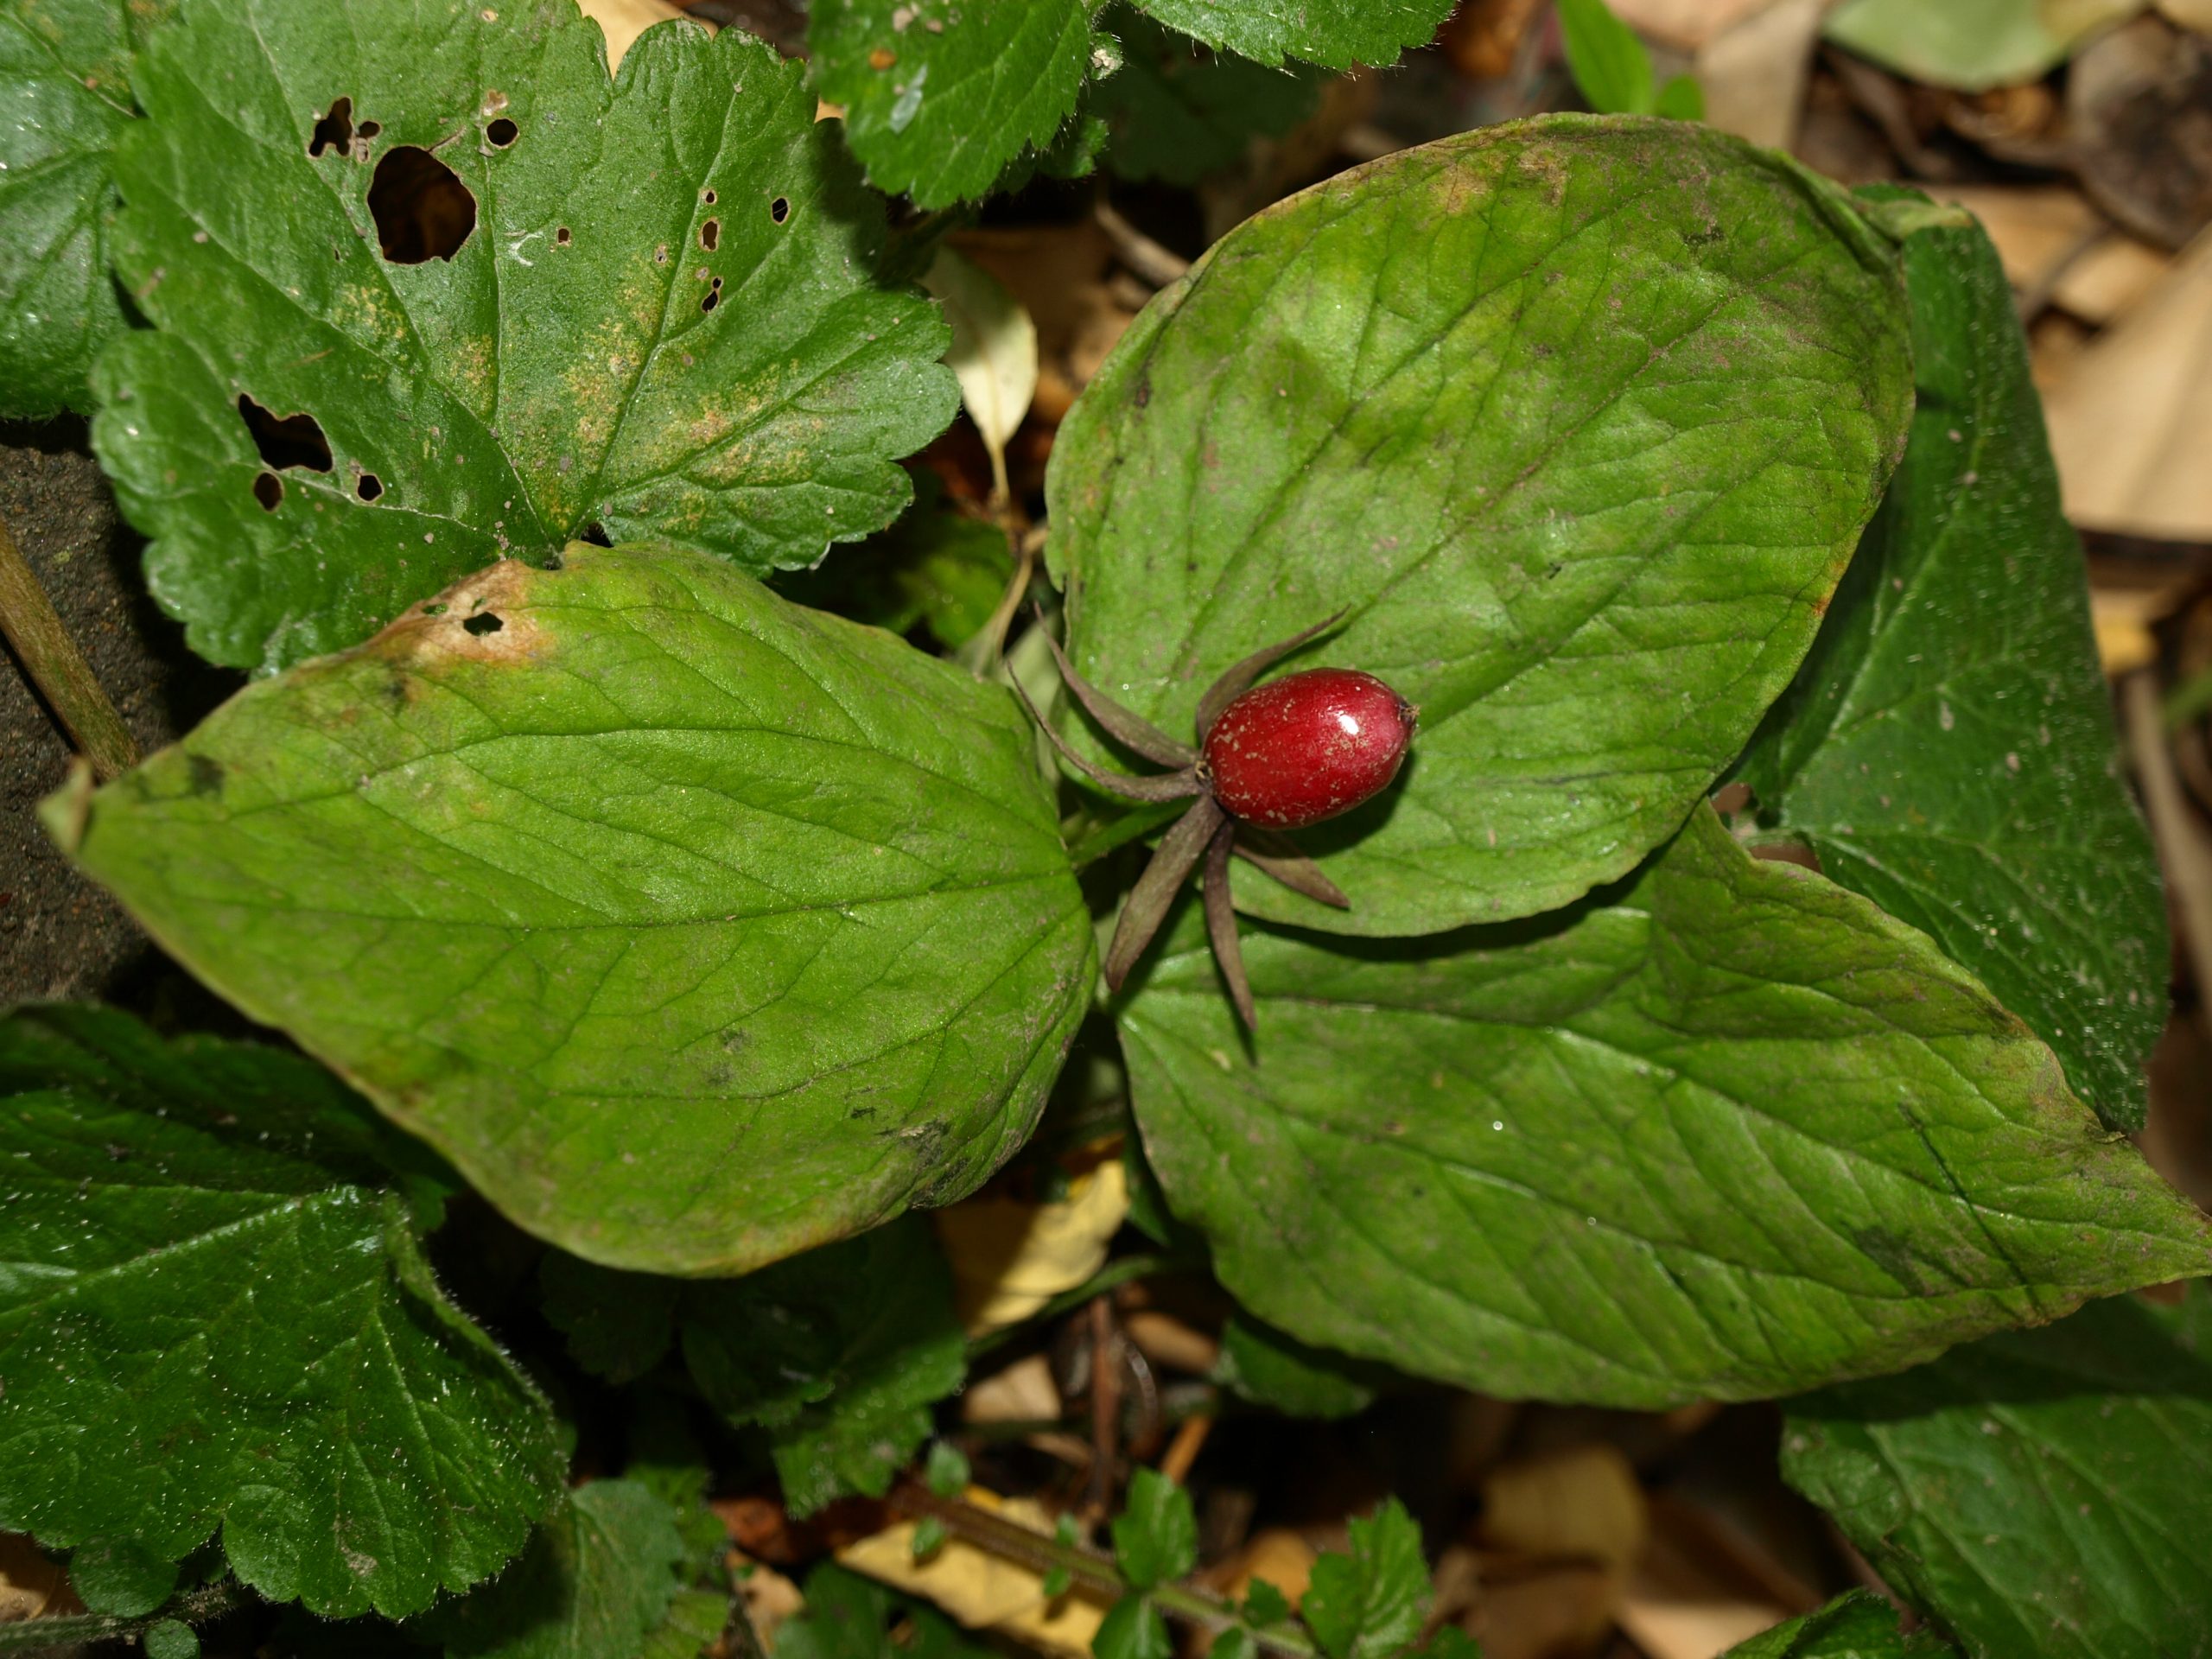 <p>Trillium, an important medicinal plant, is becoming increasingly hard to find in Kashmir [image courtesy: Akhtar H Malik, Kashmir University]</p>